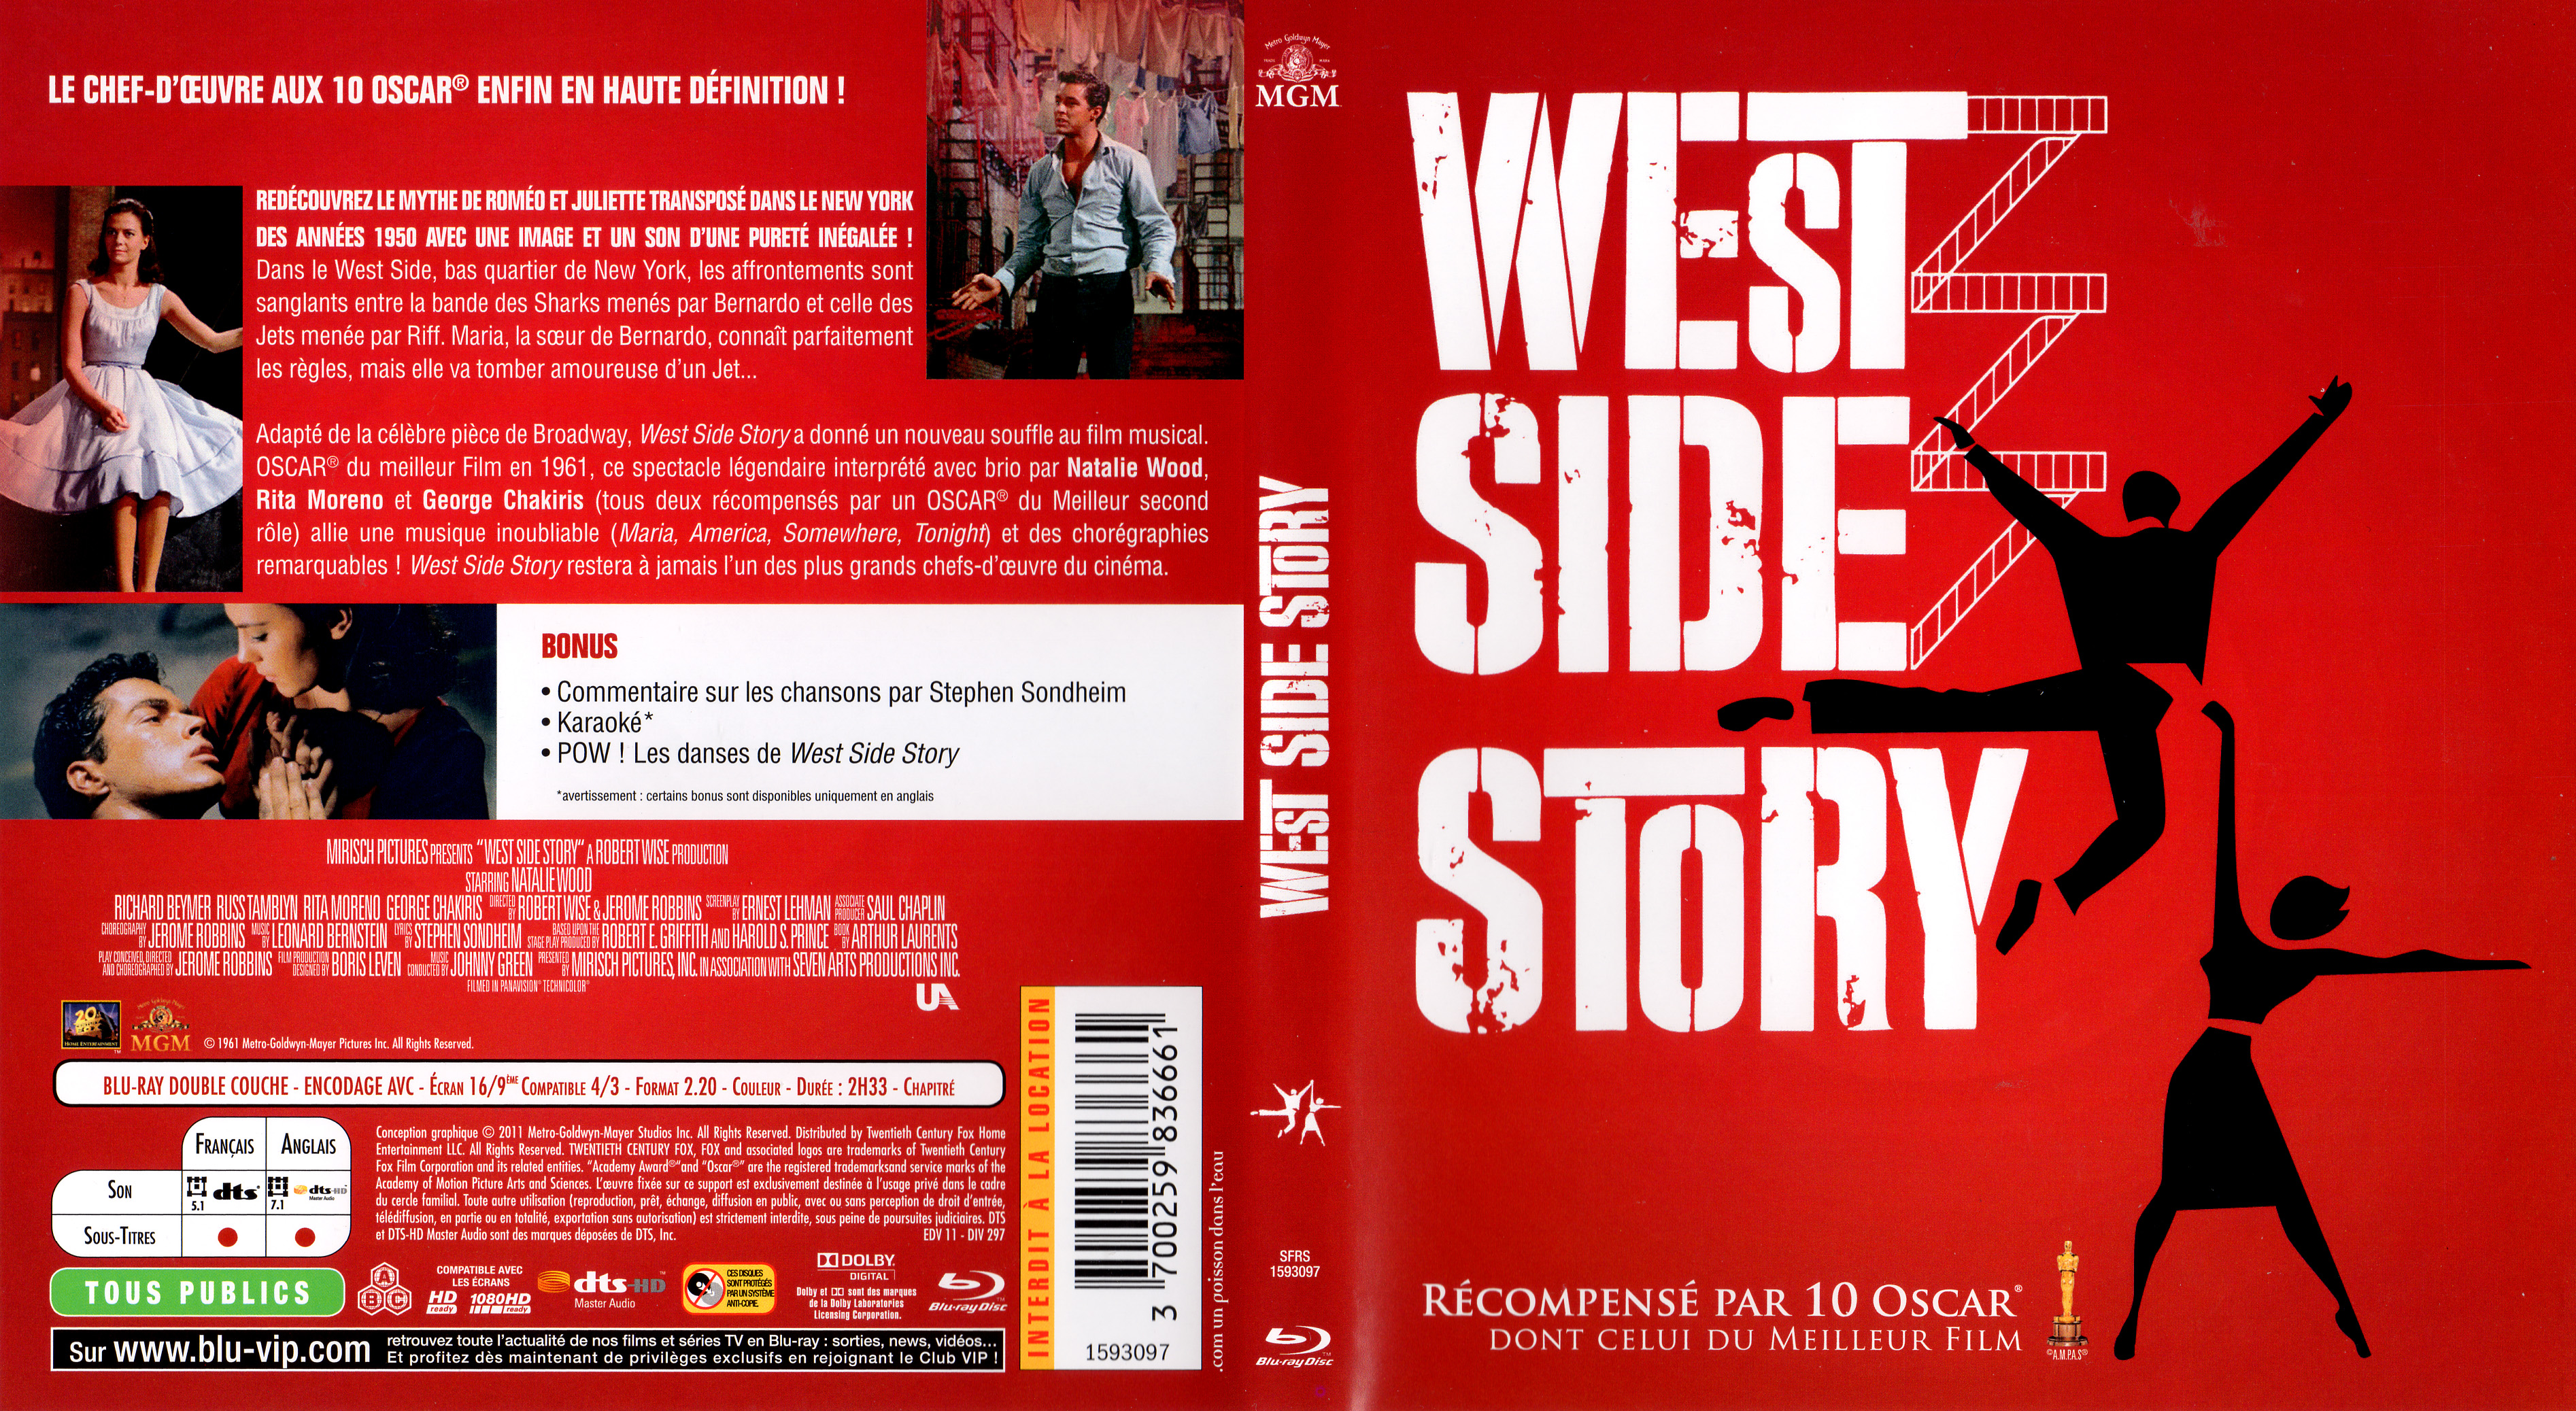 Jaquette DVD West side story (BLU-RAY)